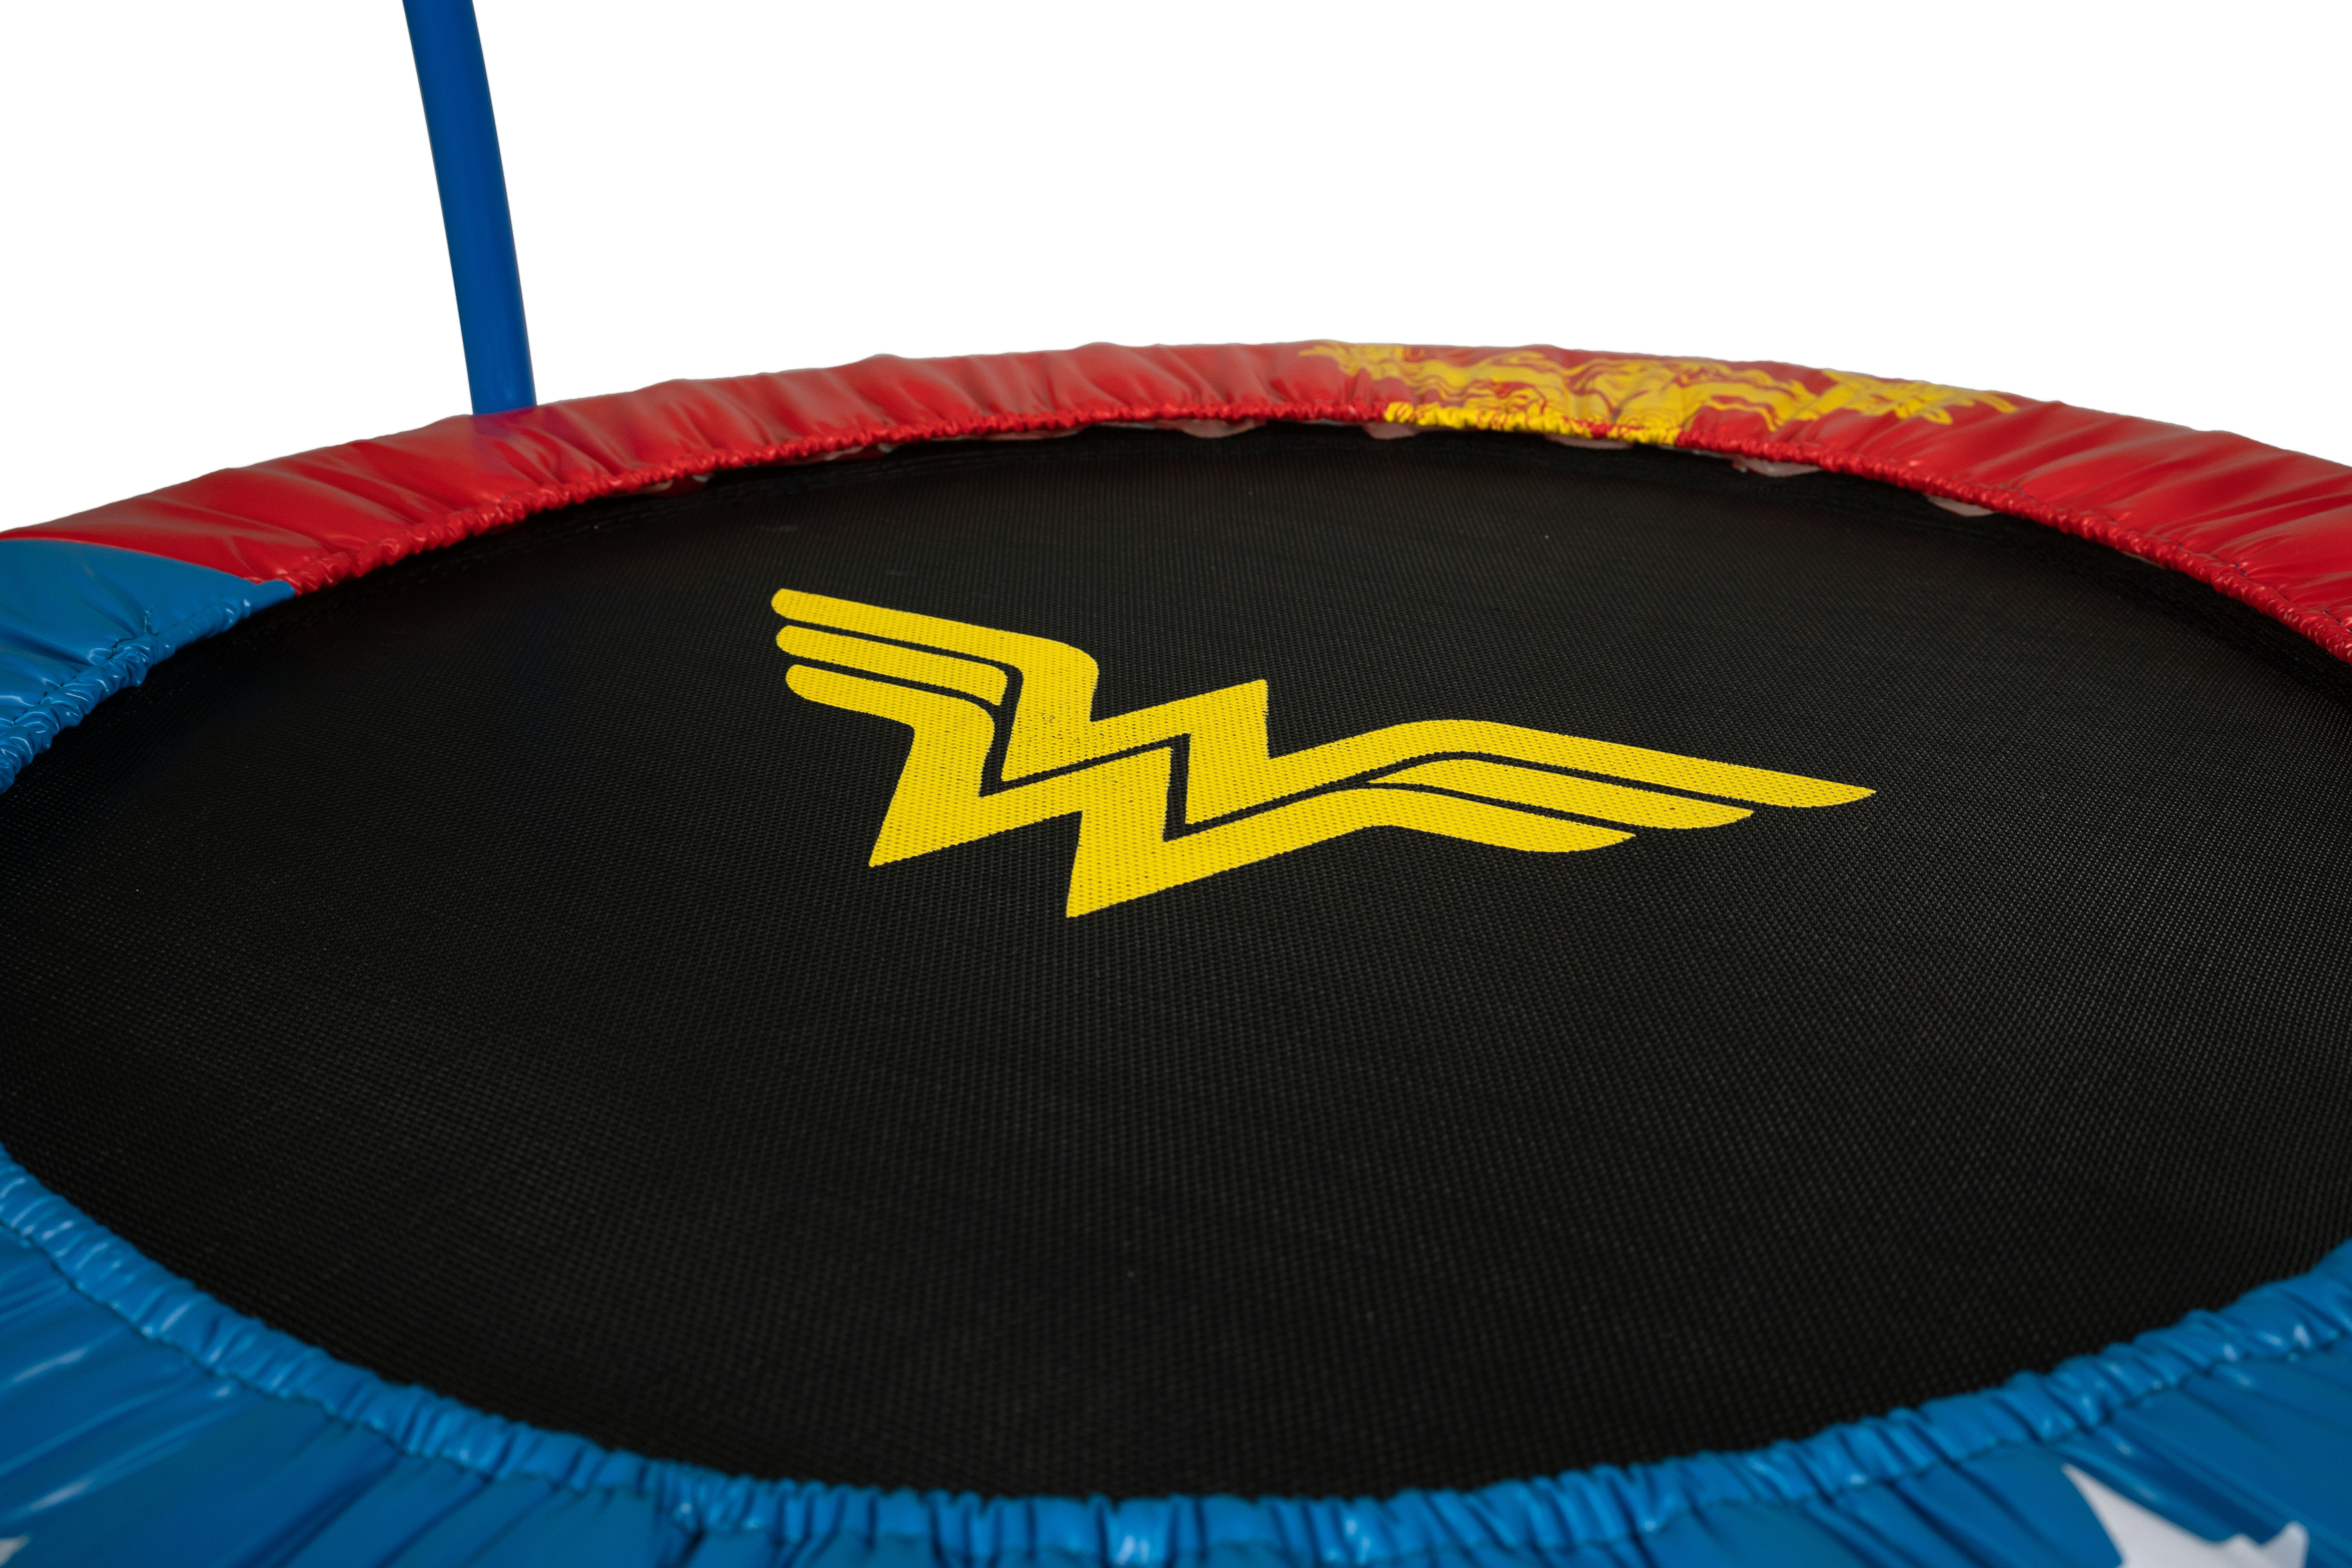 My First Wonder Woman 36-Inch Trampoline, with Handlebar - image 3 of 6